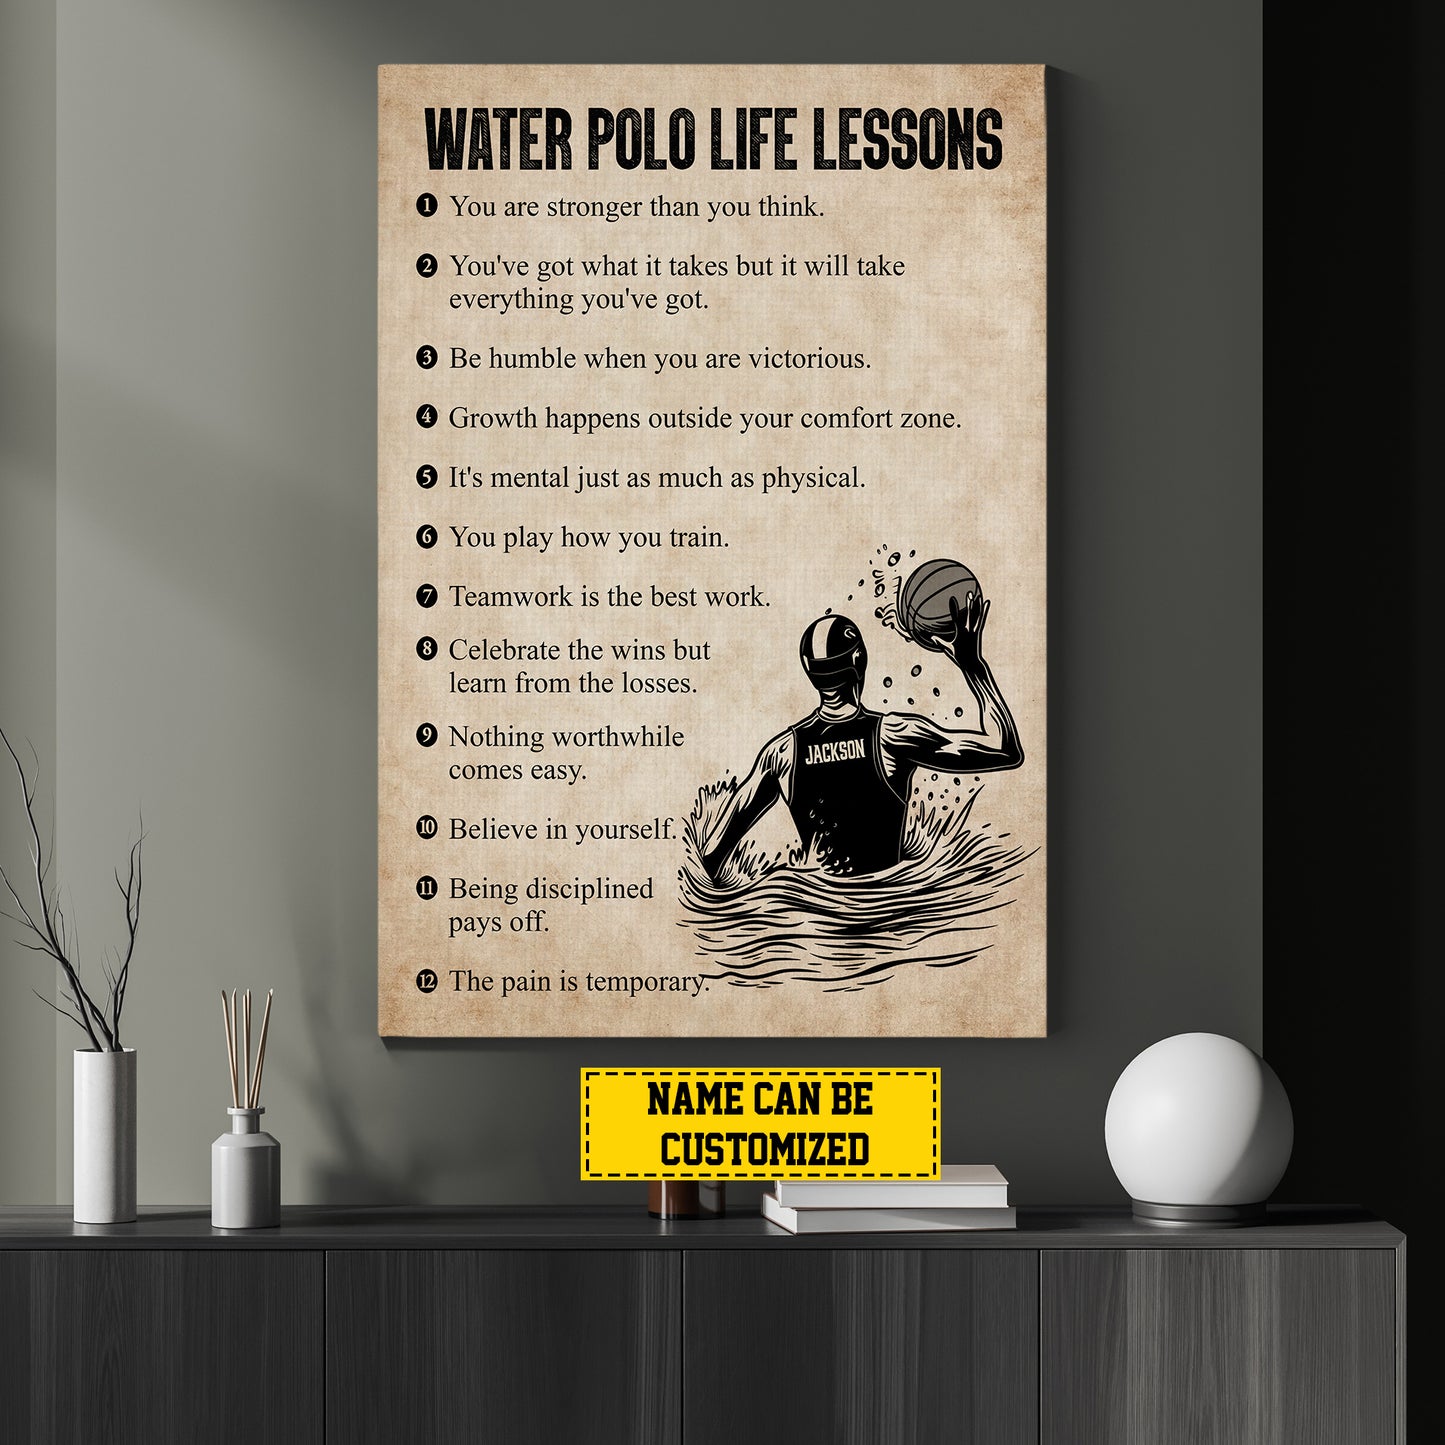 Personalized Water Polo Boy Canvas Painting, Water Polo Life Lessons, Inspirational Quotes Wall Art Decor, Poster Gift For Water Polo Boy Lovers